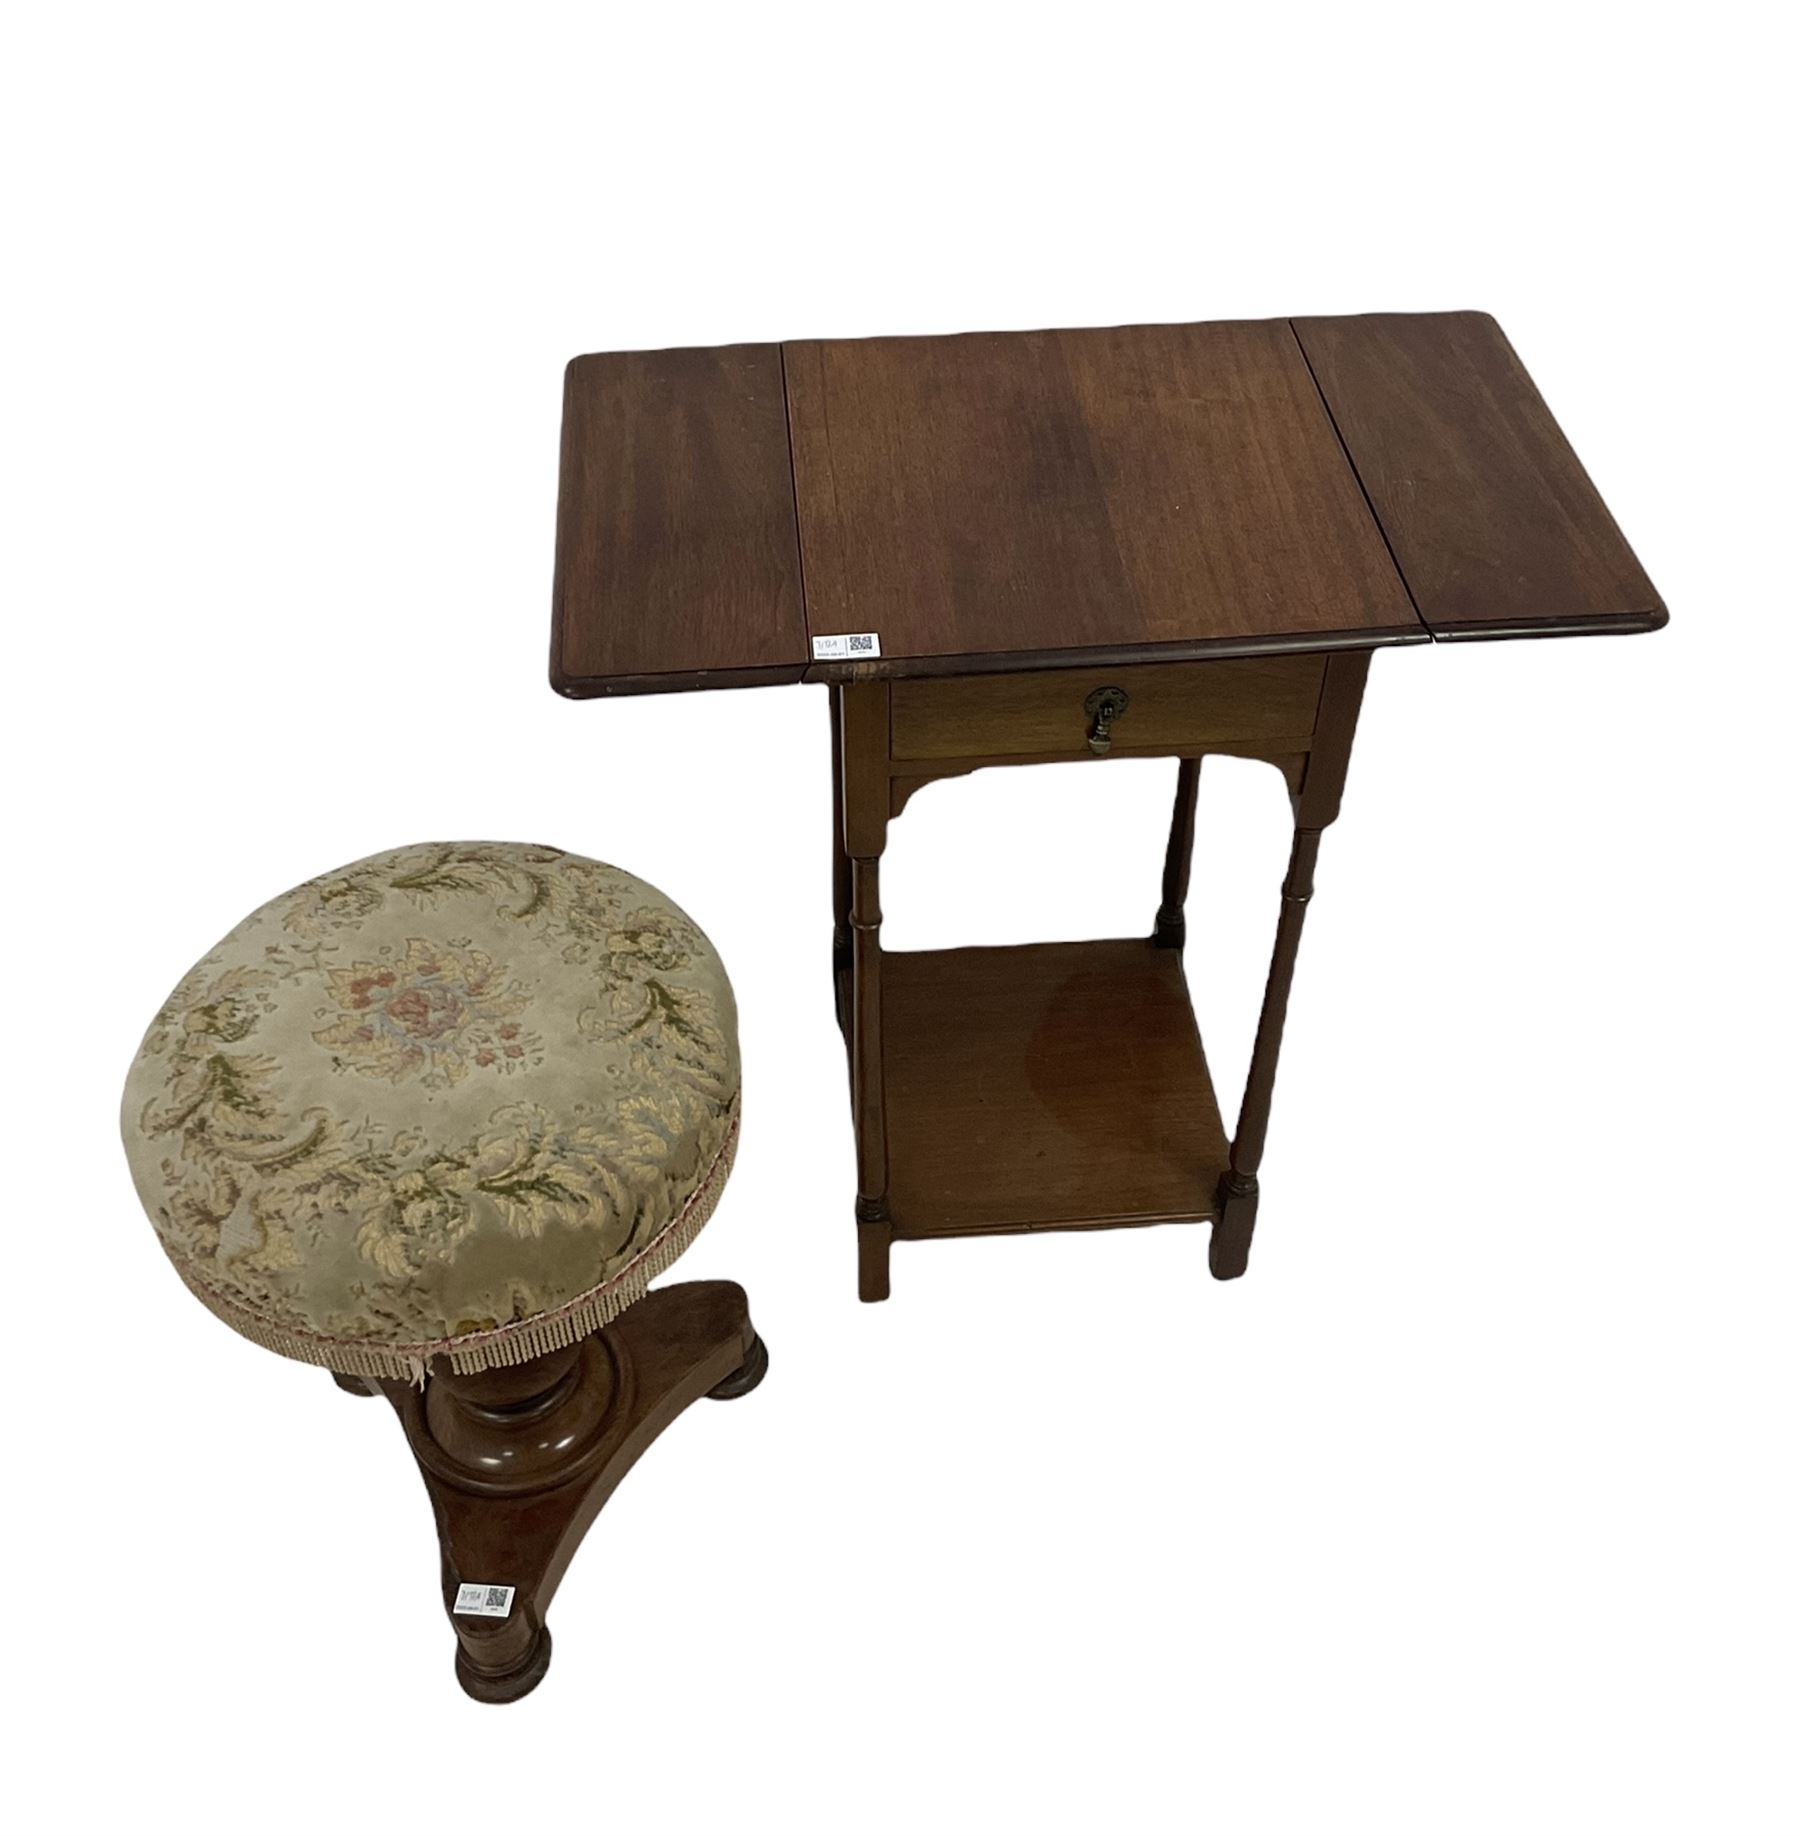 Mahogany drop leaf occasional table - Image 2 of 2